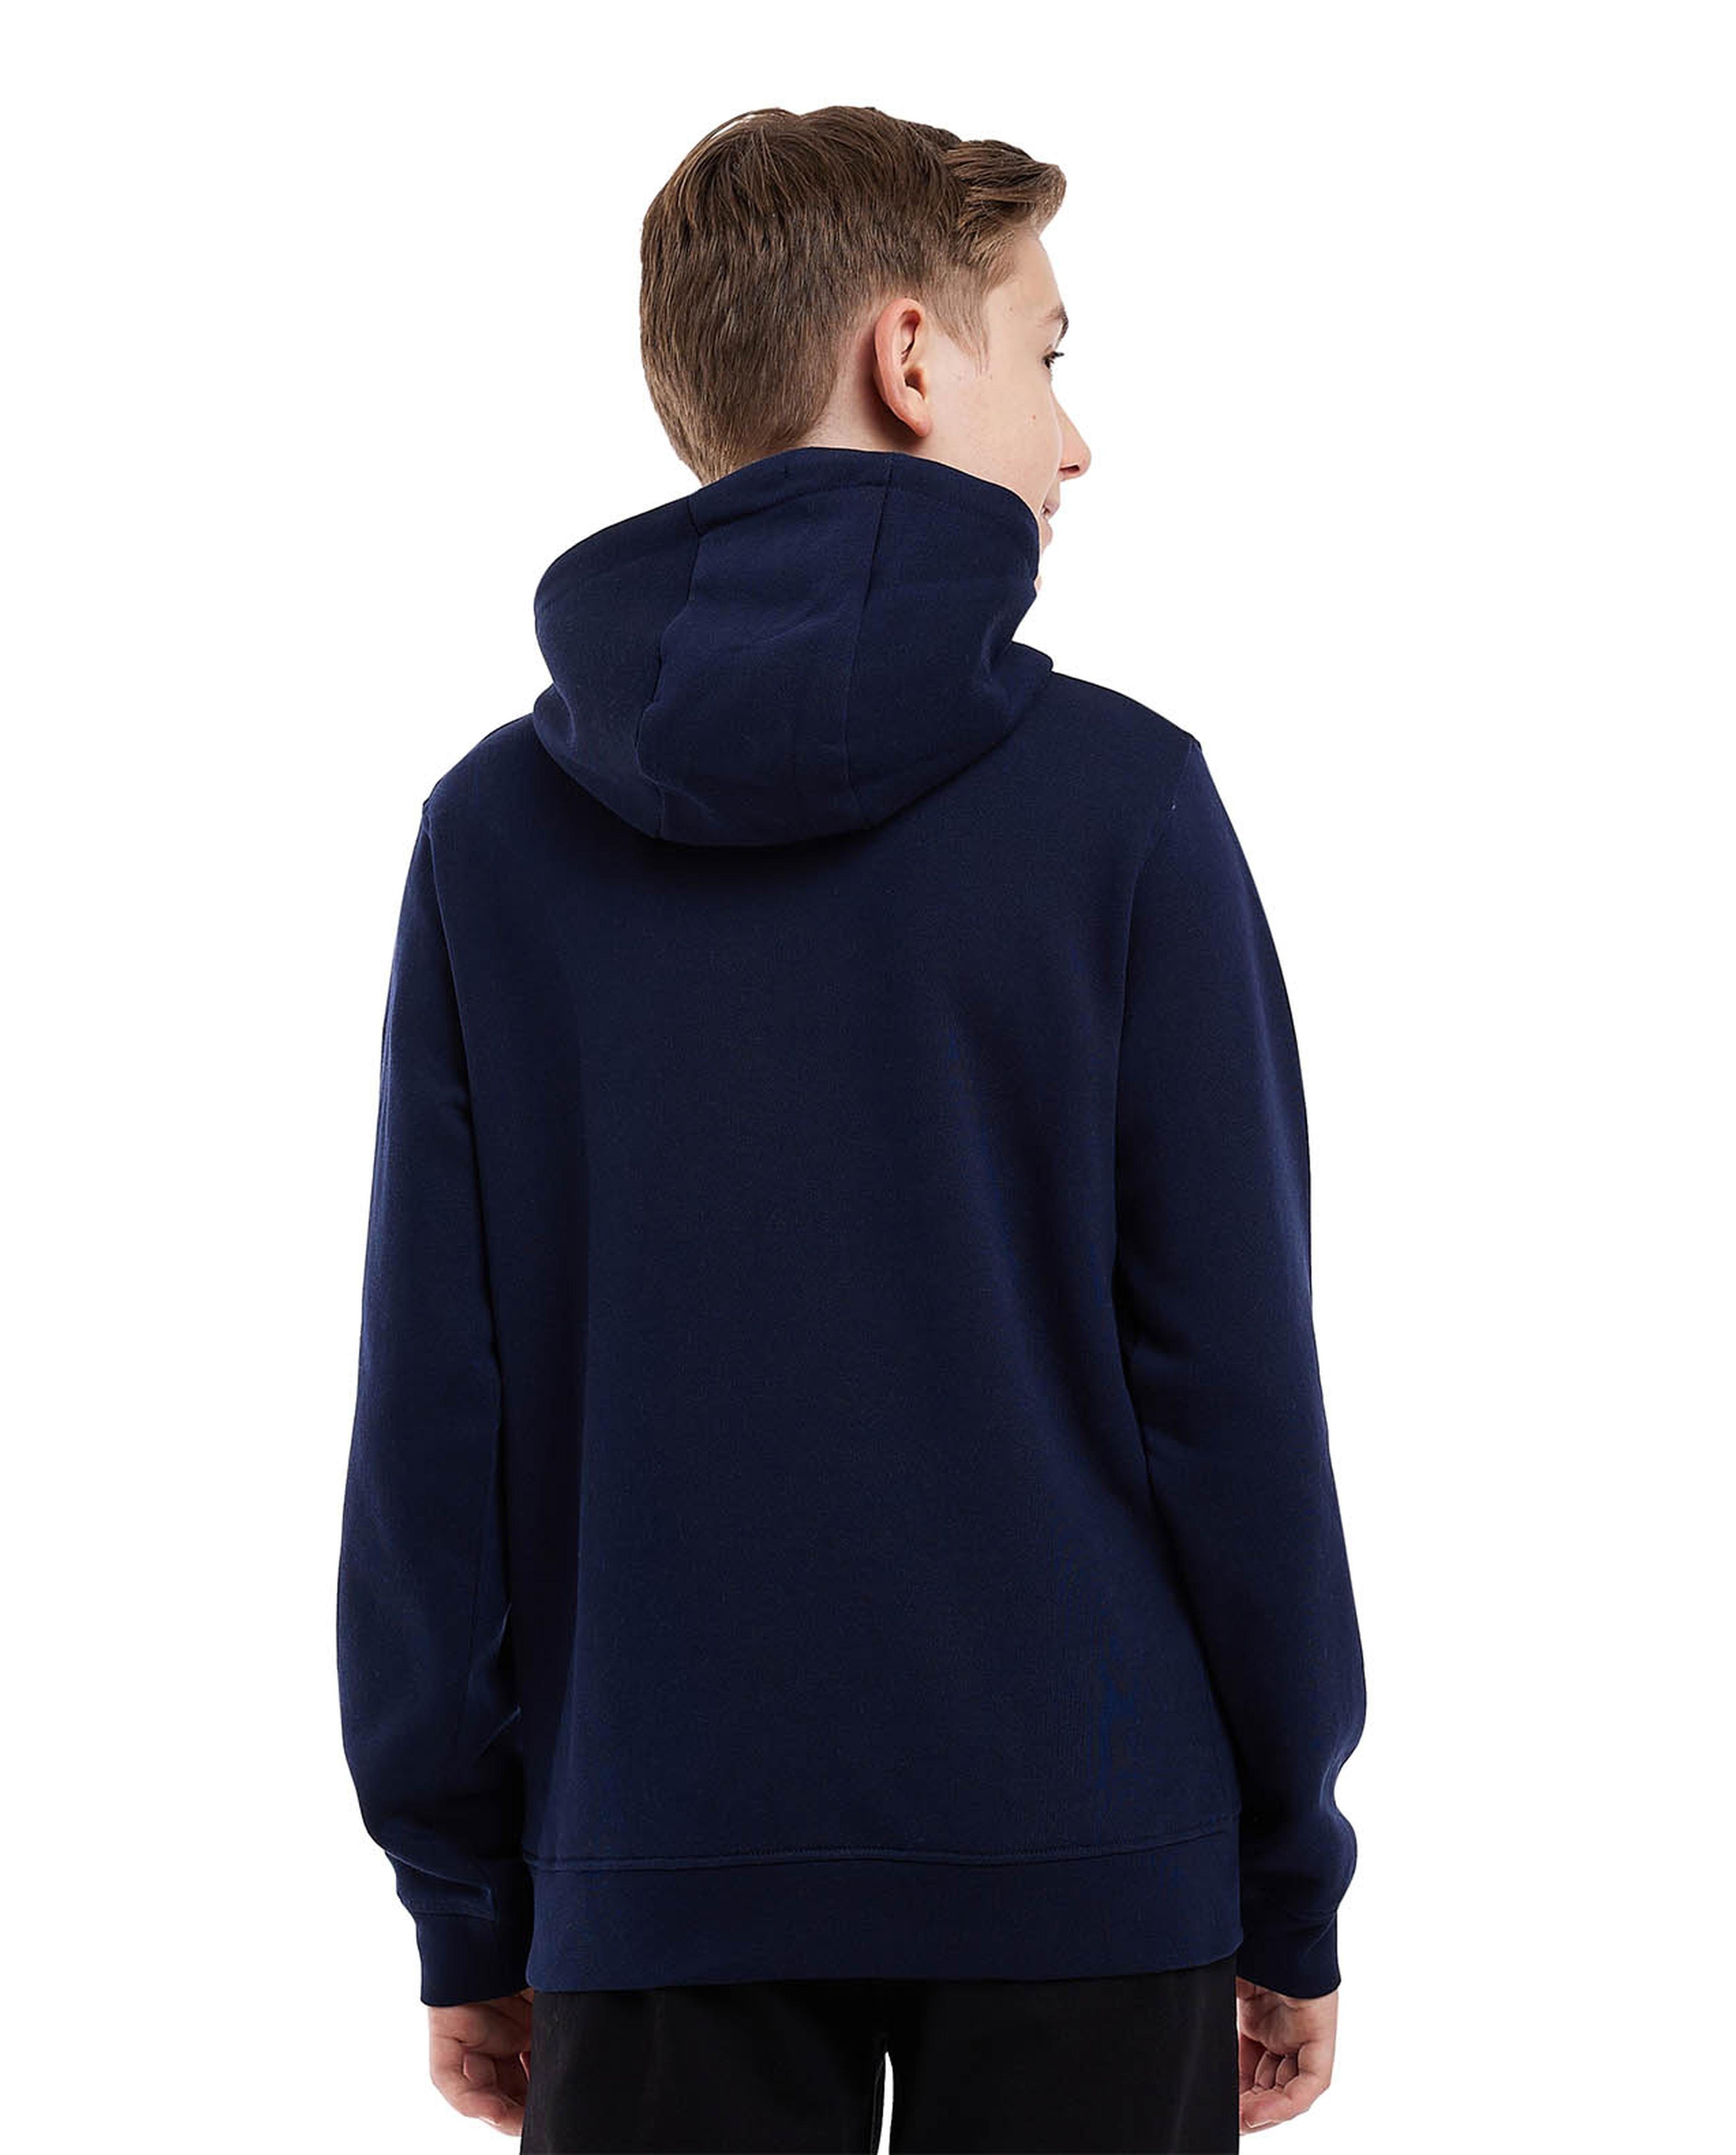 Embroidered Hoodie with Long Sleeves